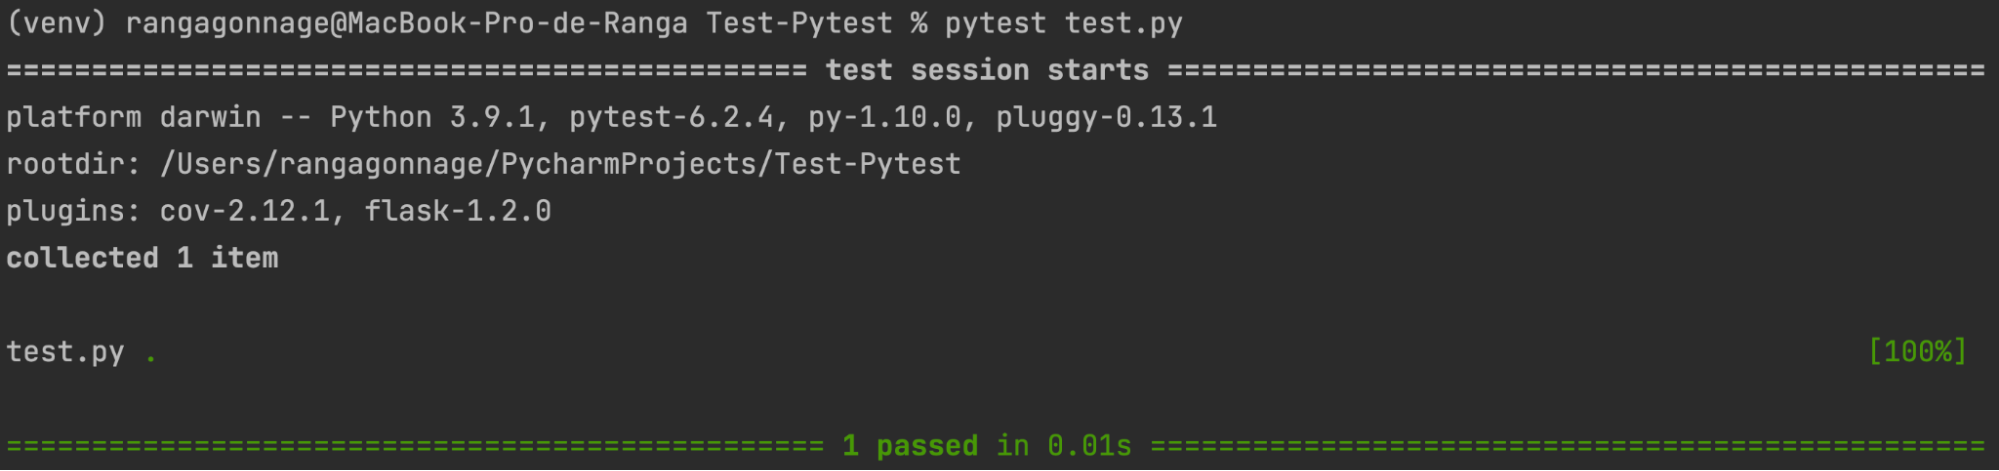 After correcting the error, the test is successful as specified by Pytest in the terminal.